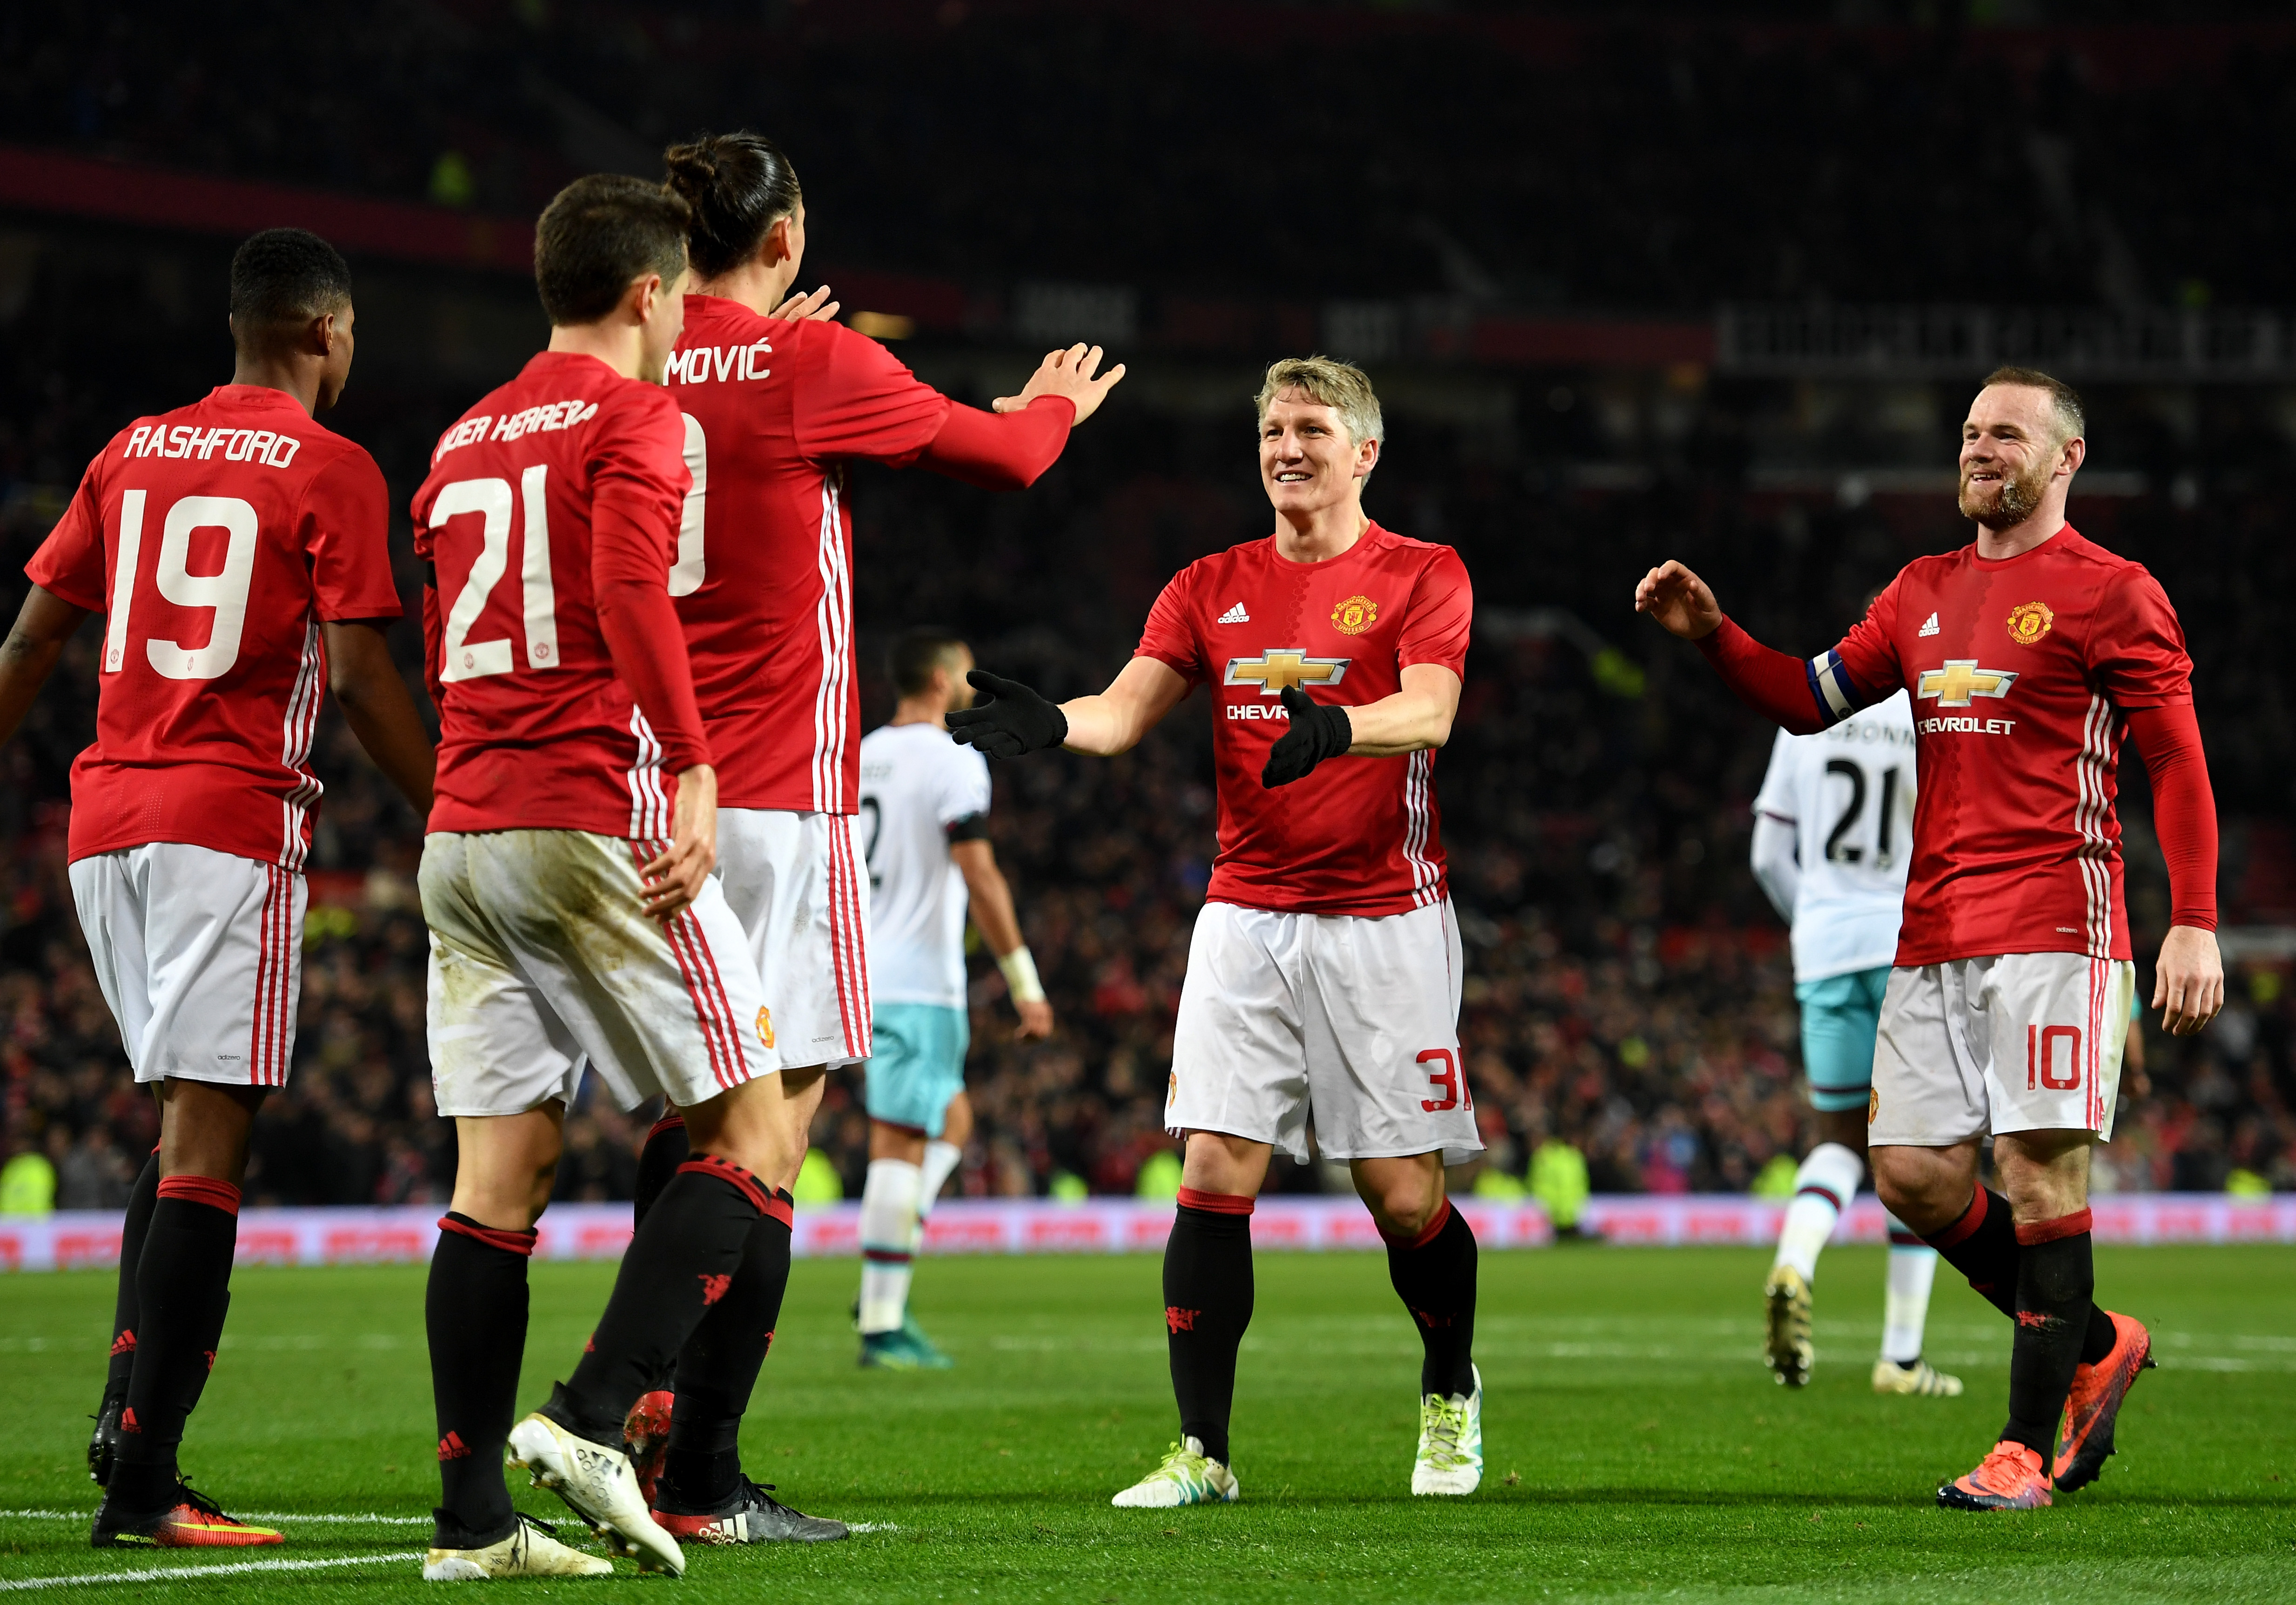 MANCHESTER, ENGLAND - NOVEMBER 30:  Zlatan Ibrahimovic of Manchester United celebrates with team mates after scoring his team's fourth goal of the game during the EFL Cup quarter final match between Manchester United and West Ham United at Old Trafford on November 30, 2016 in Manchester, England.  (Photo by Shaun Botterill/Getty Images)